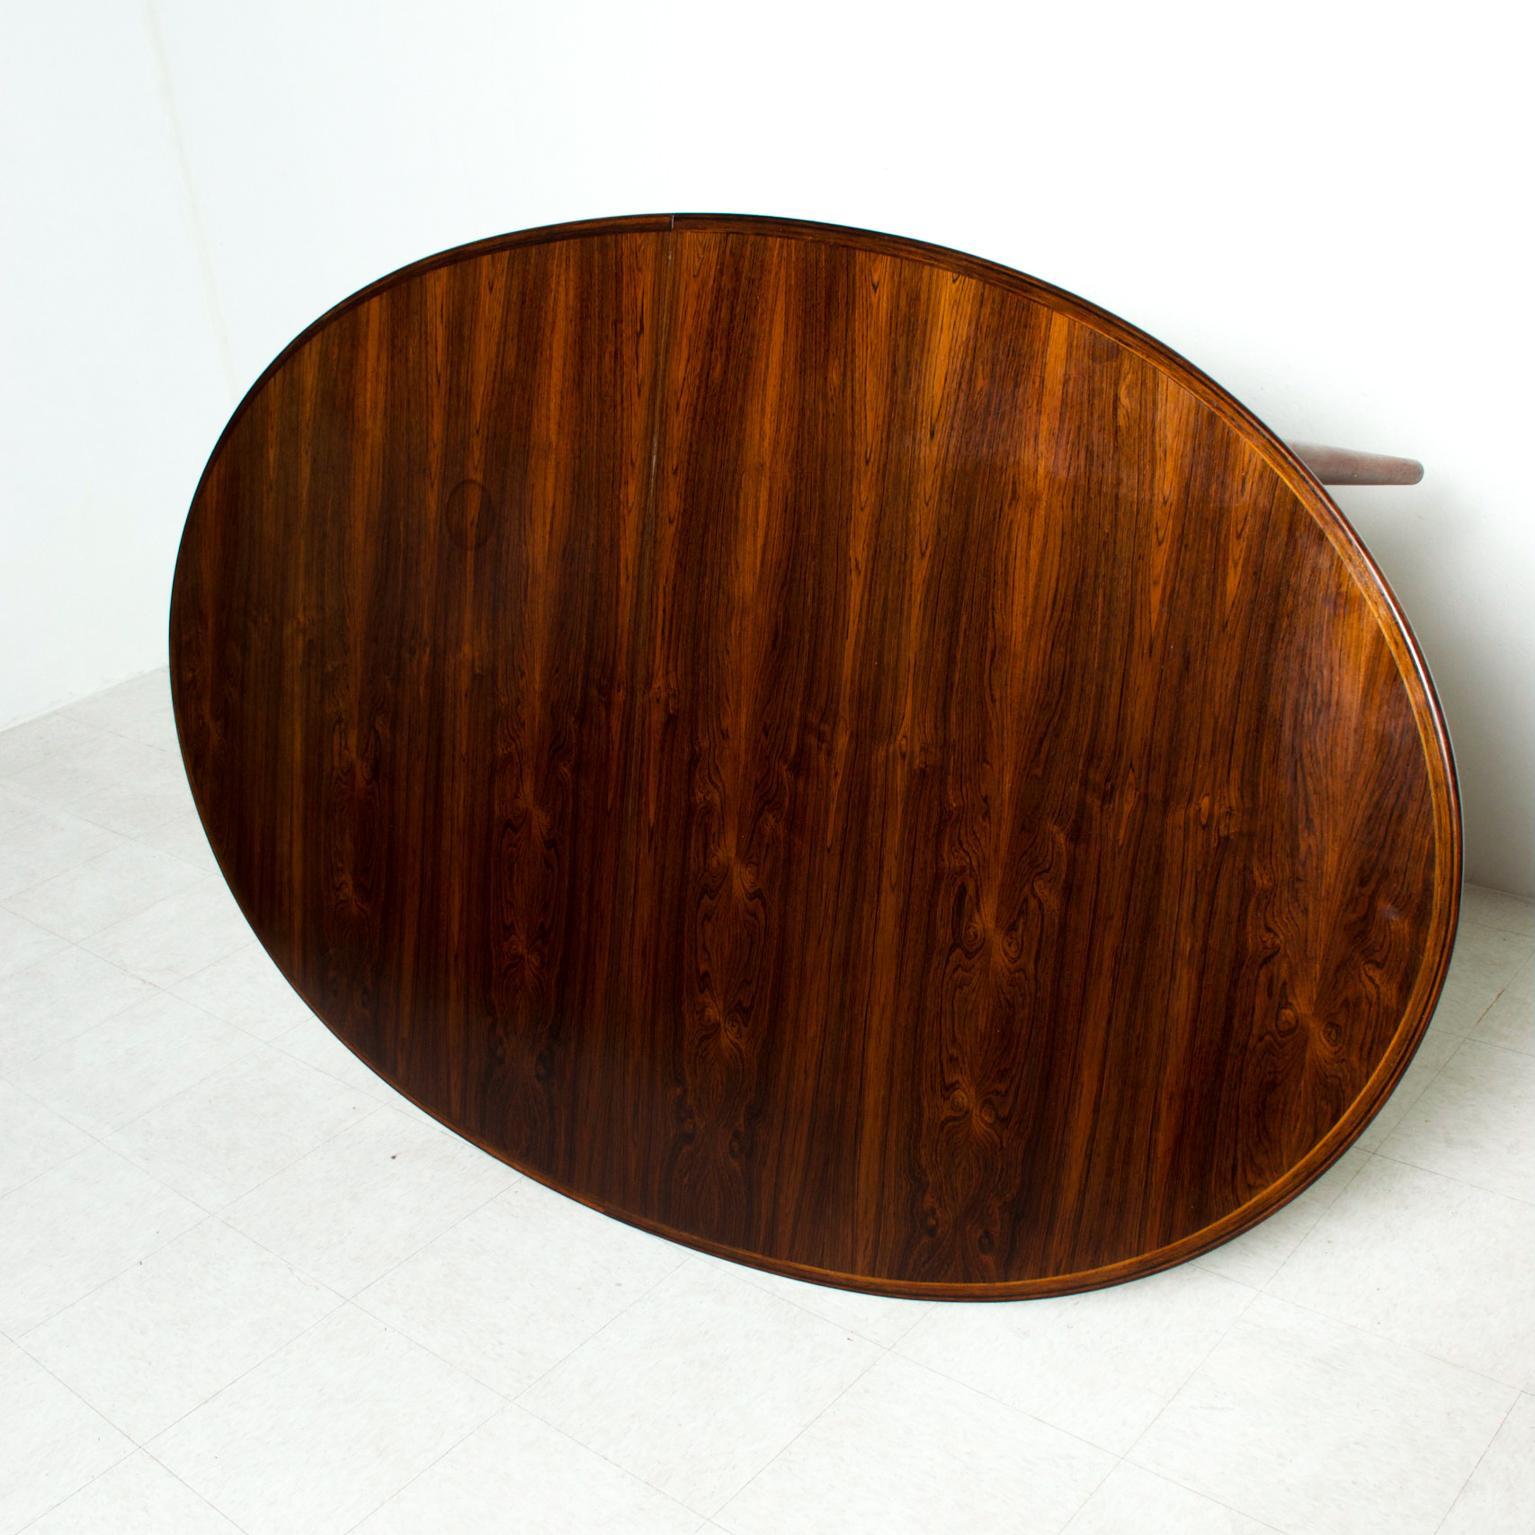 Midcentury Danish Modern Rosewood Oval Dining Table by Arne Vodder for SIBAST 1